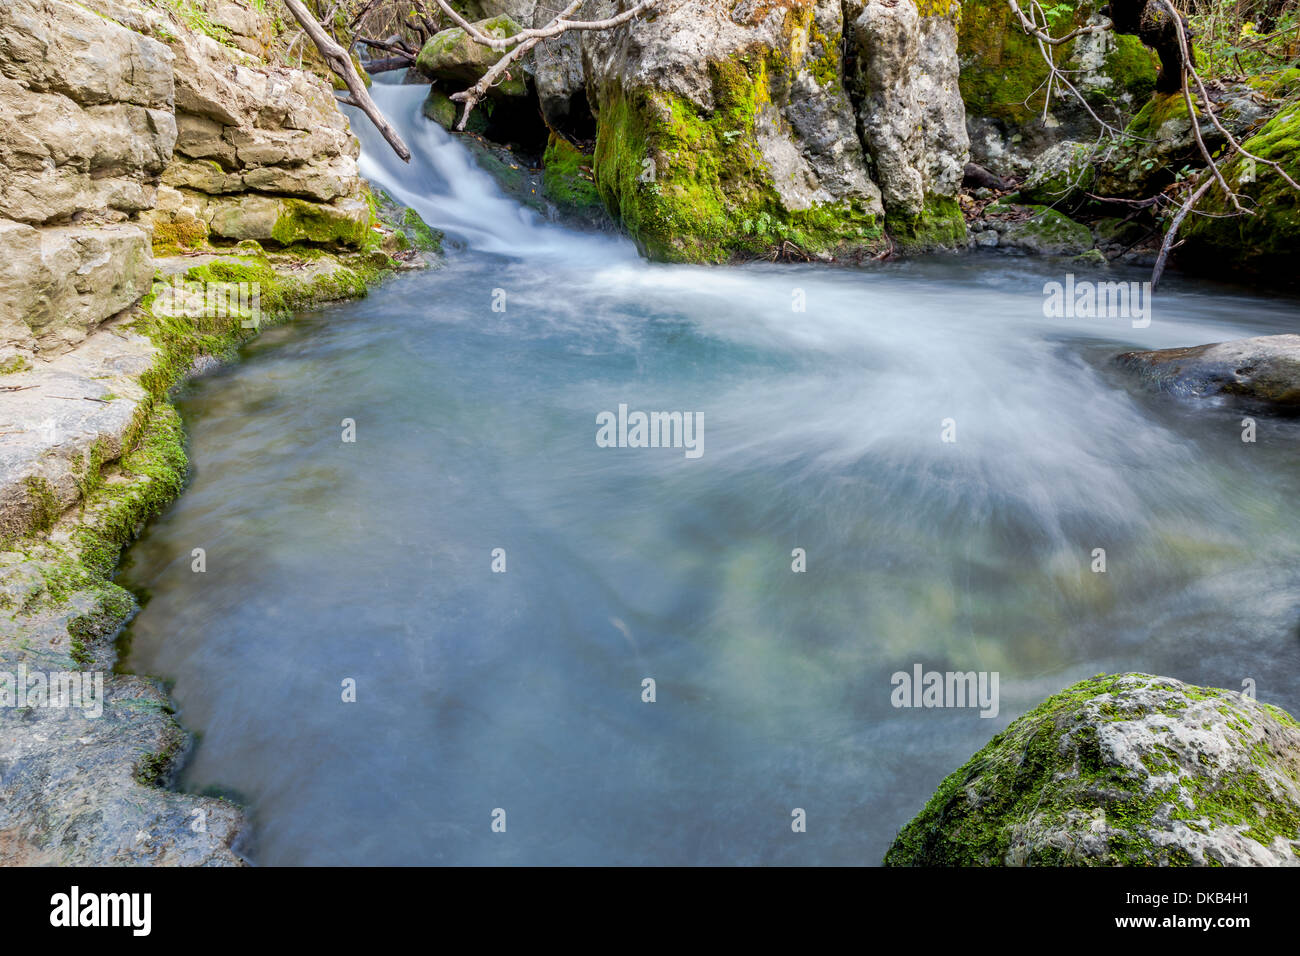 River Majaceite between the towns of El Bosque and Benamahoma on the  province of Cadiz, Spain Stock Photo - Alamy